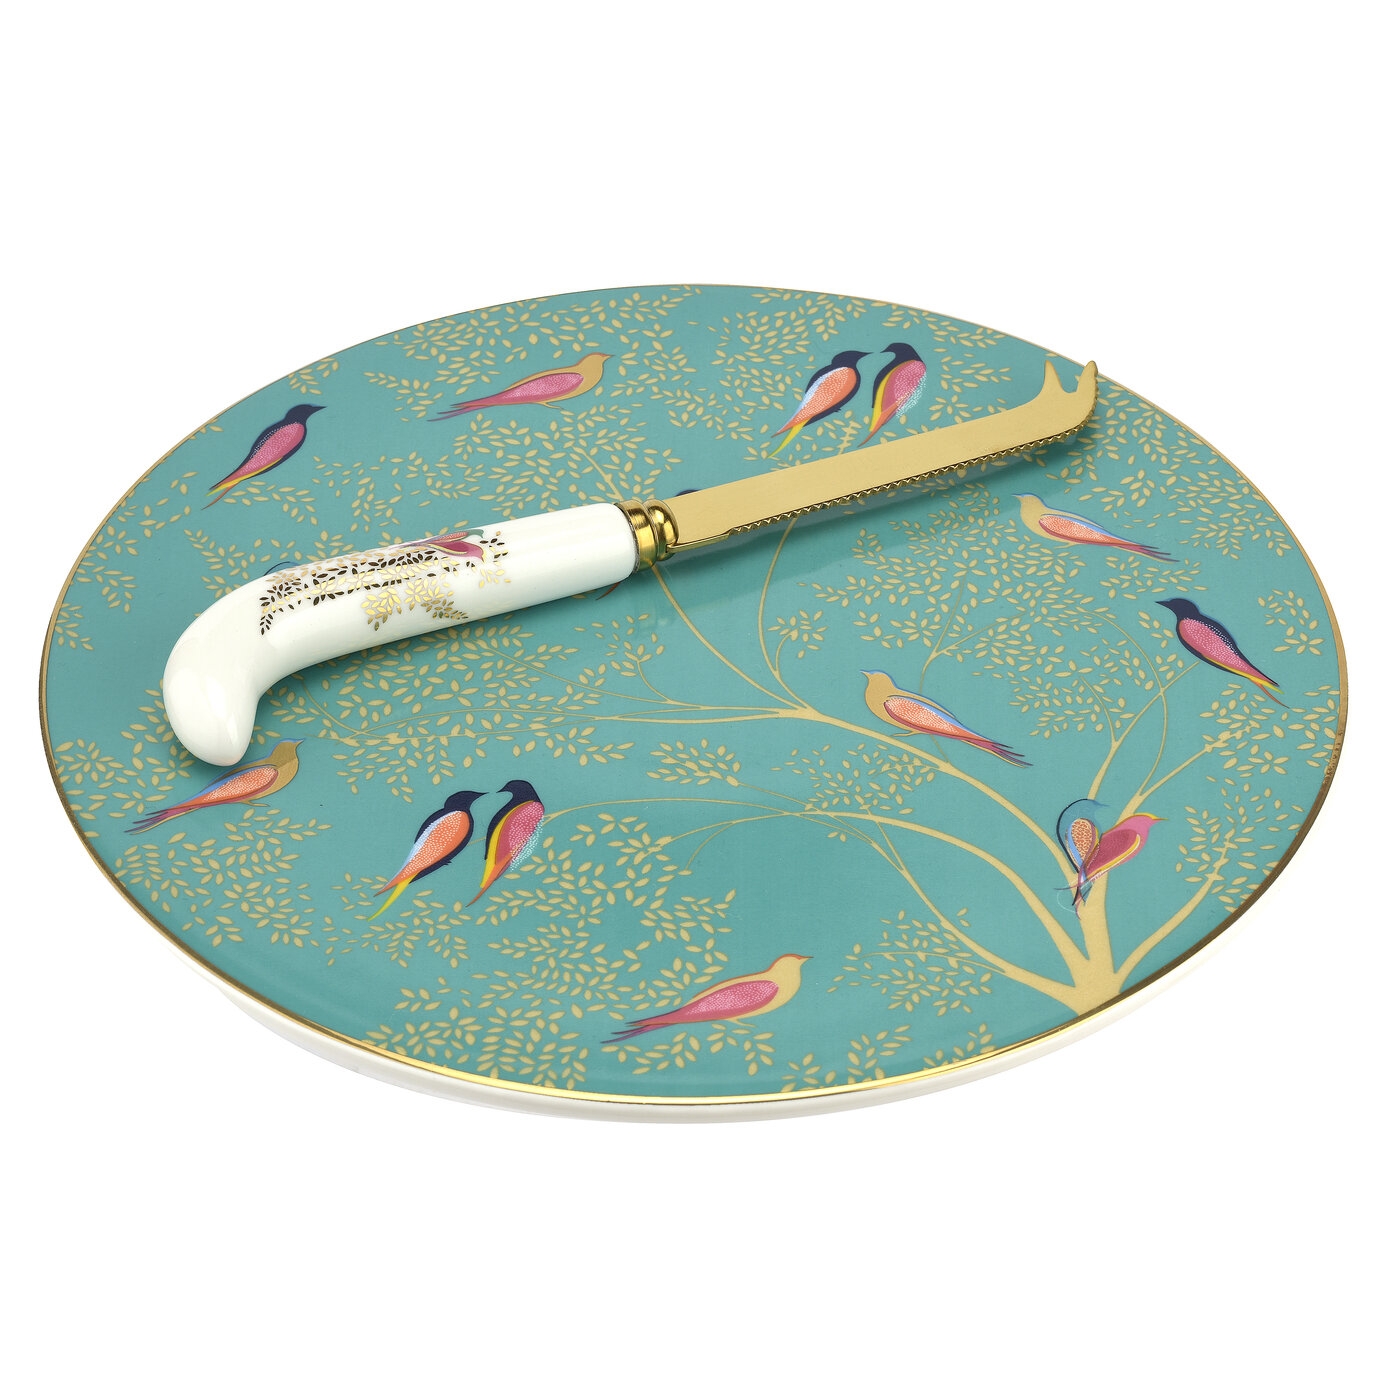 Sara Miller London Chelsea Cheese Plate with Knife, Green image number null